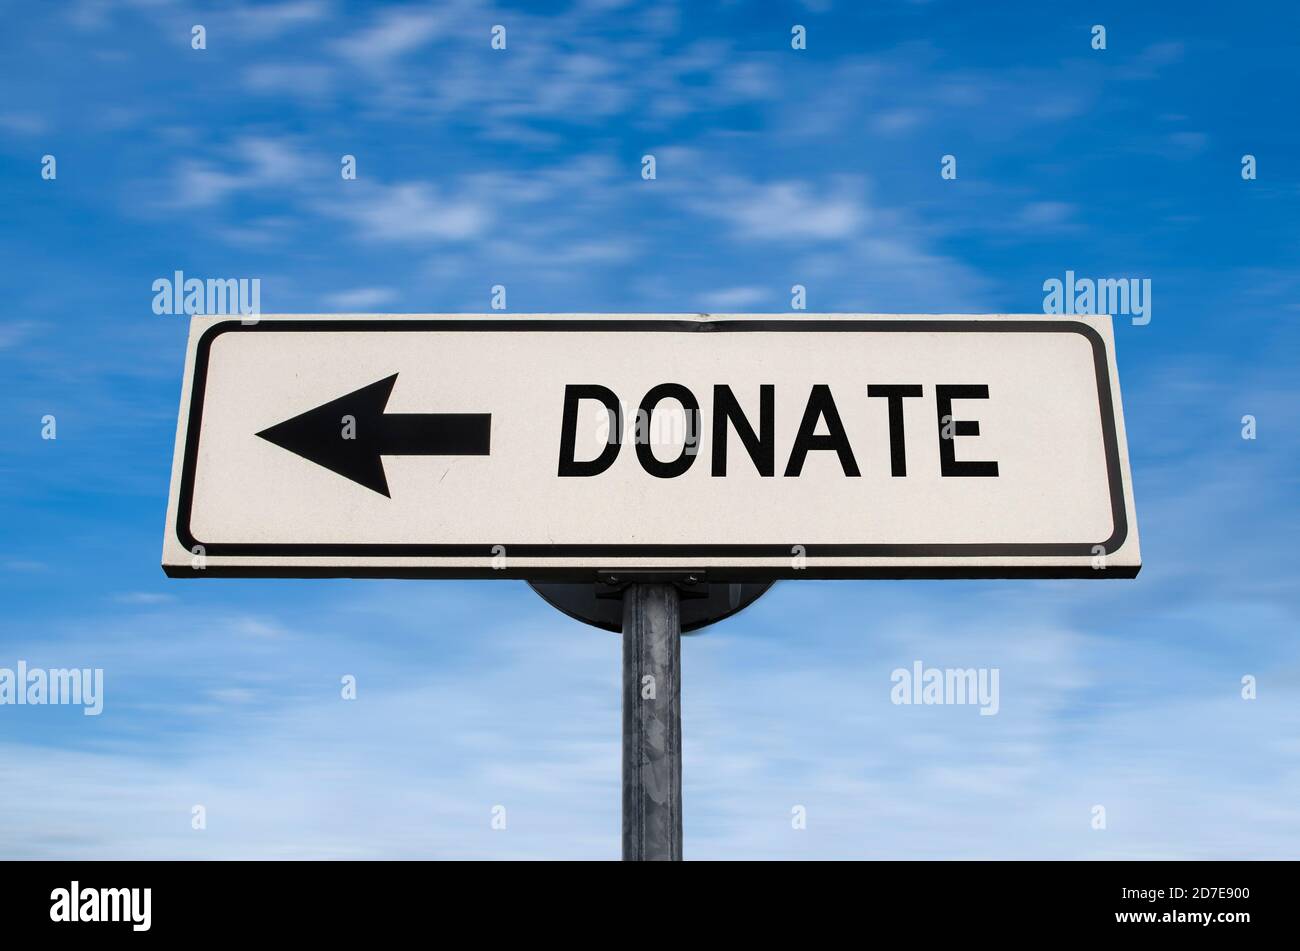 Please Donate Road Sign. Stock Photo, Picture and Royalty Free